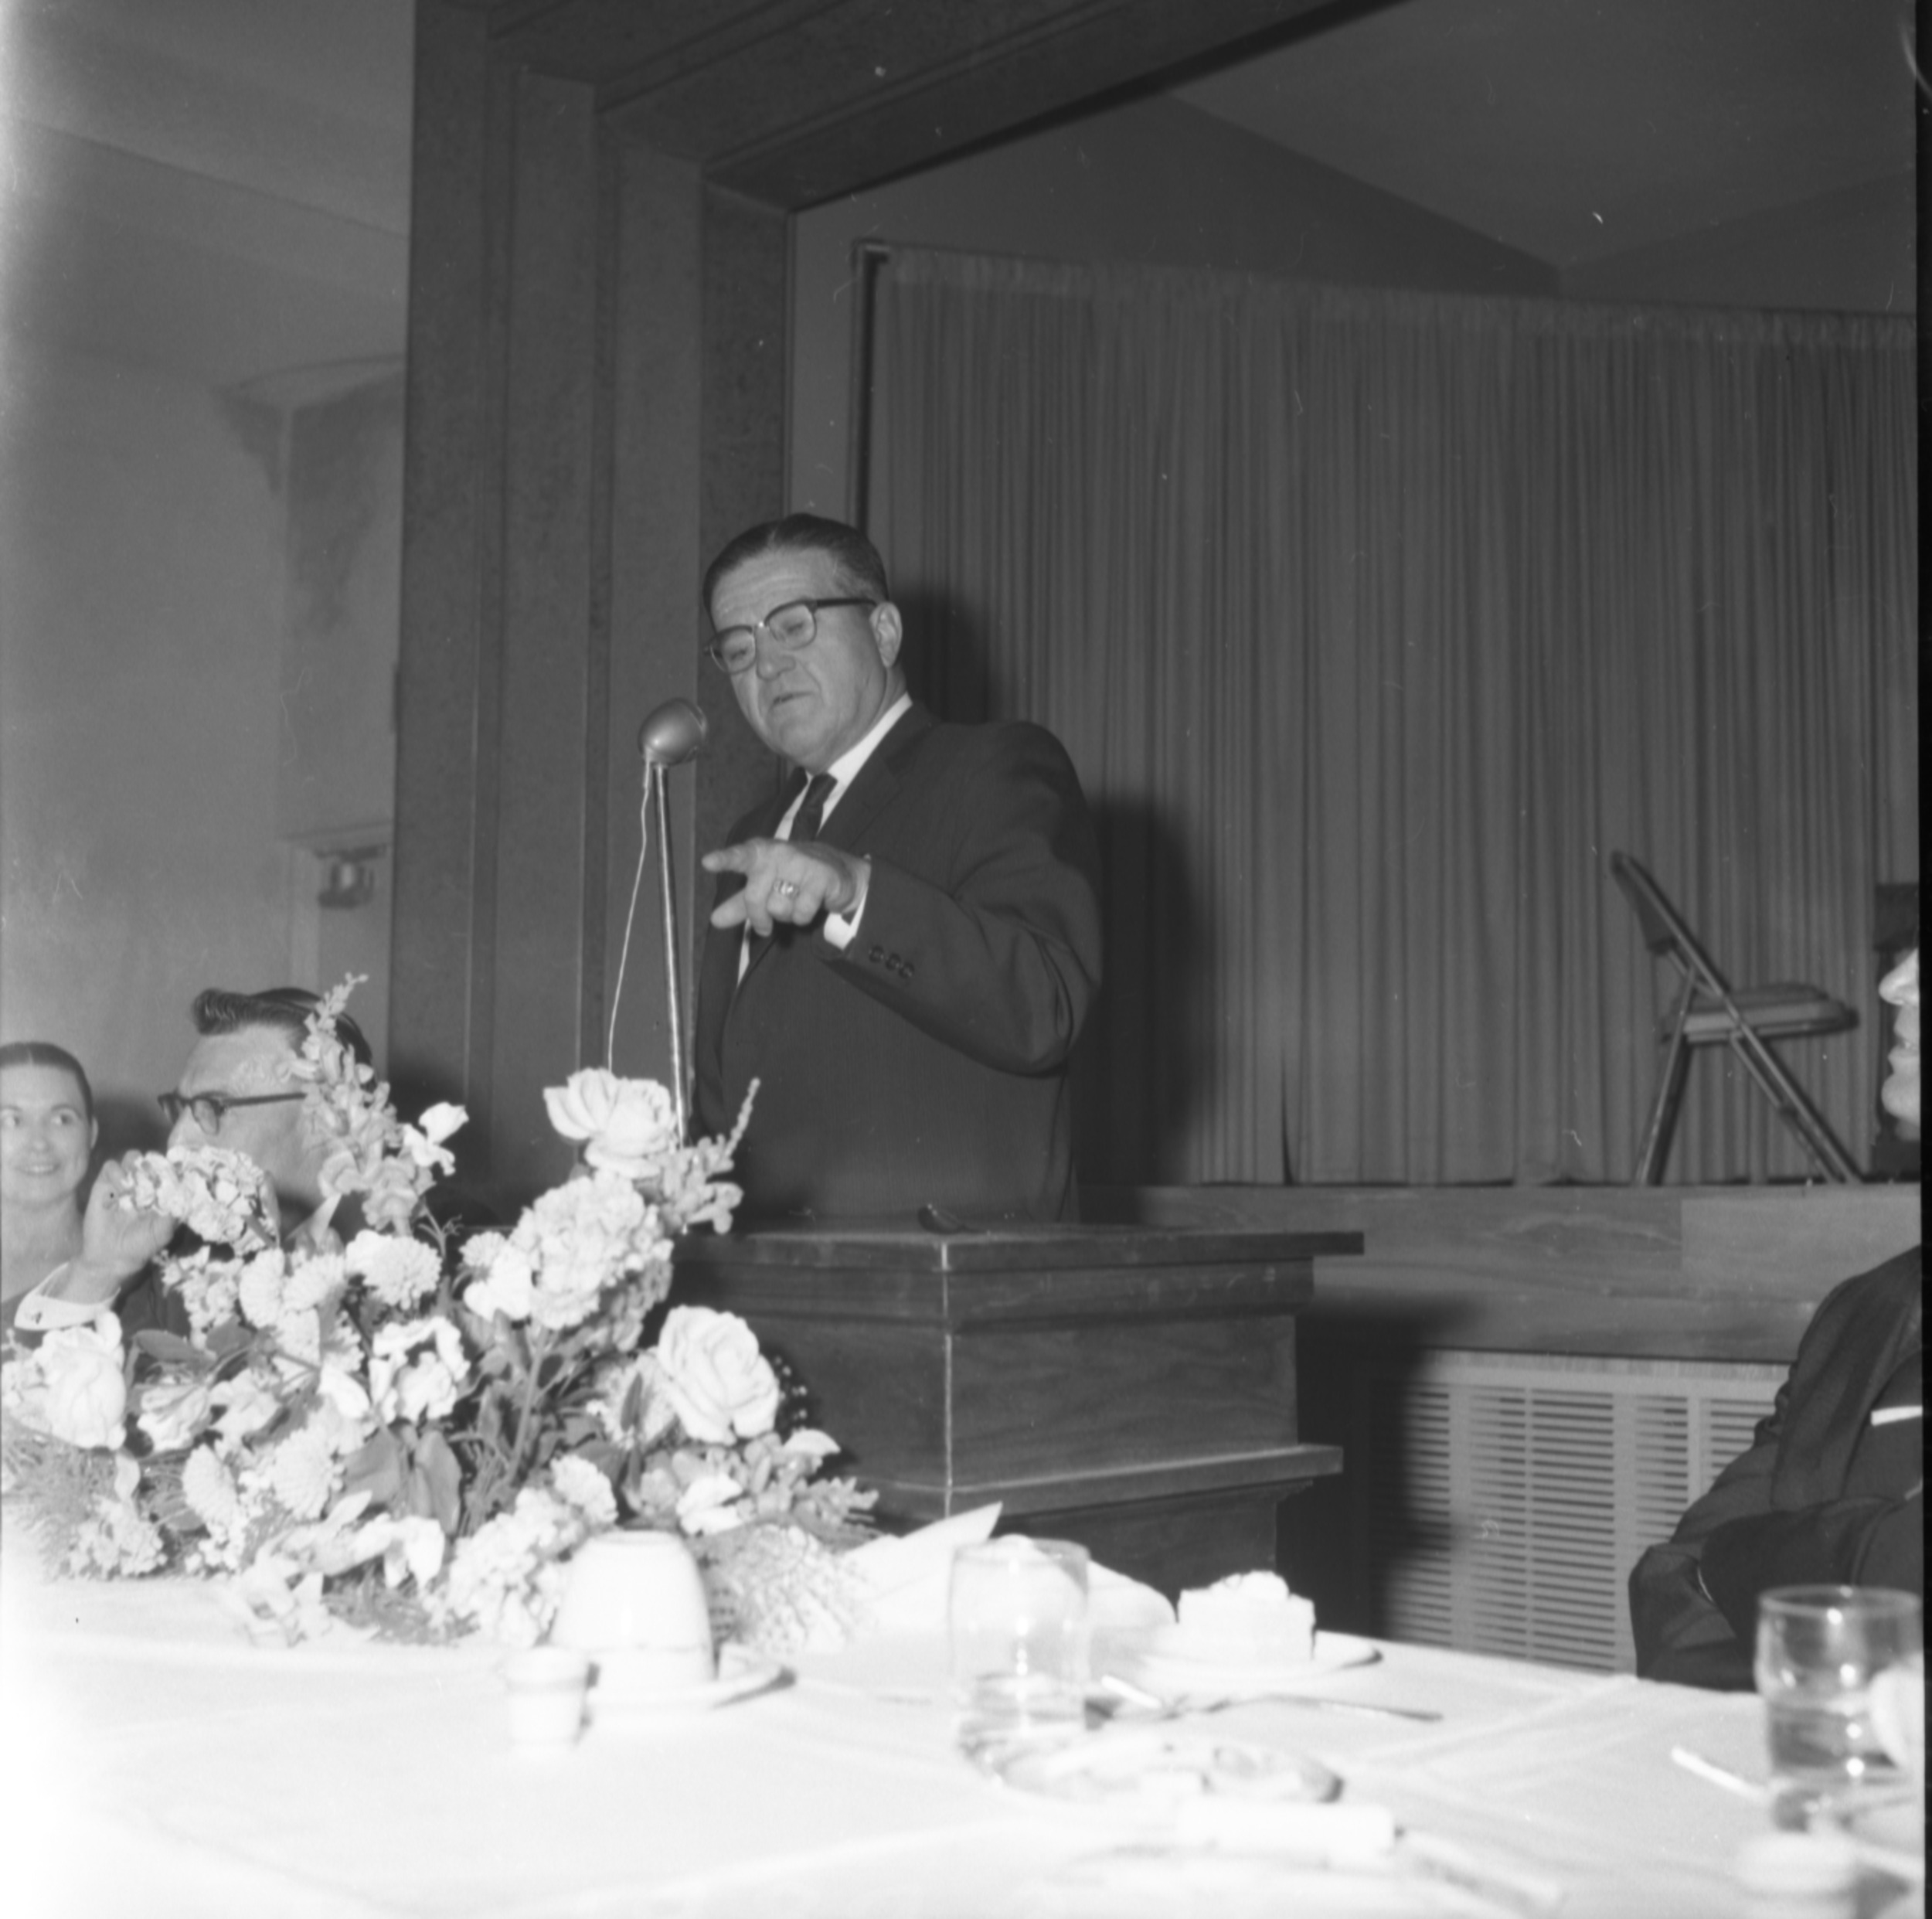 Carver House Talent Contest, May 9, 1962, Image 09